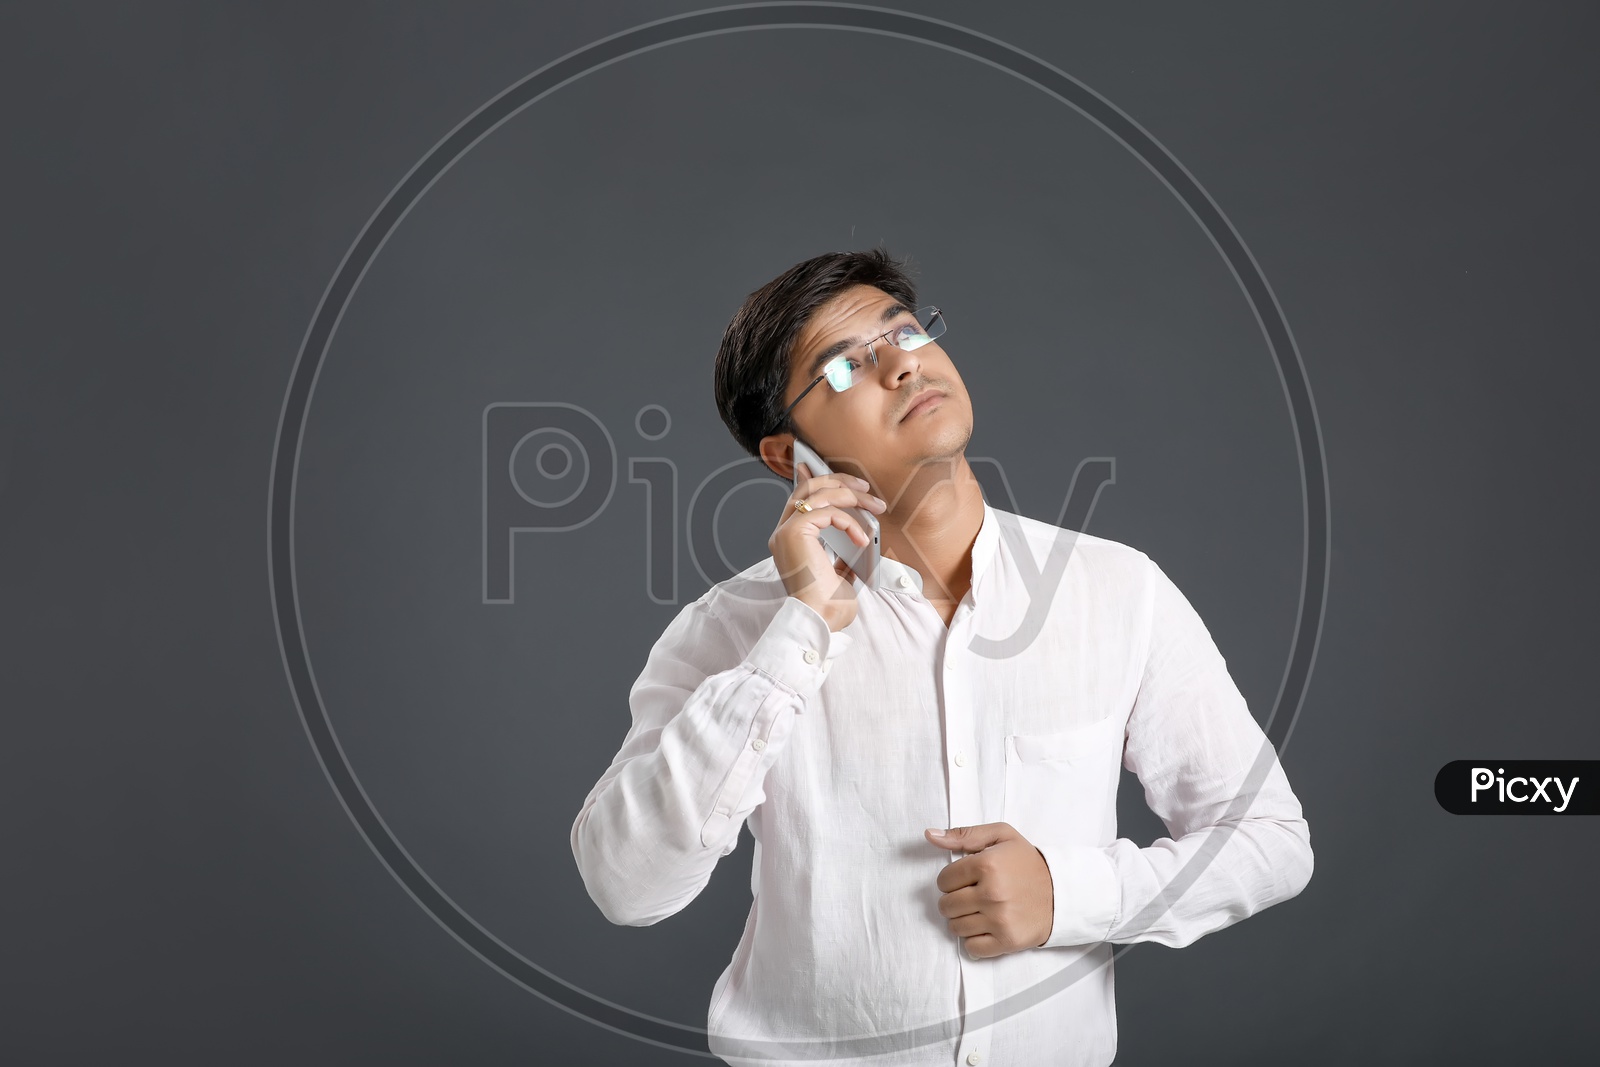 Young Man or Indian  Man Speaking In Smart Phone Or Mobile Over An Isolated Black Background